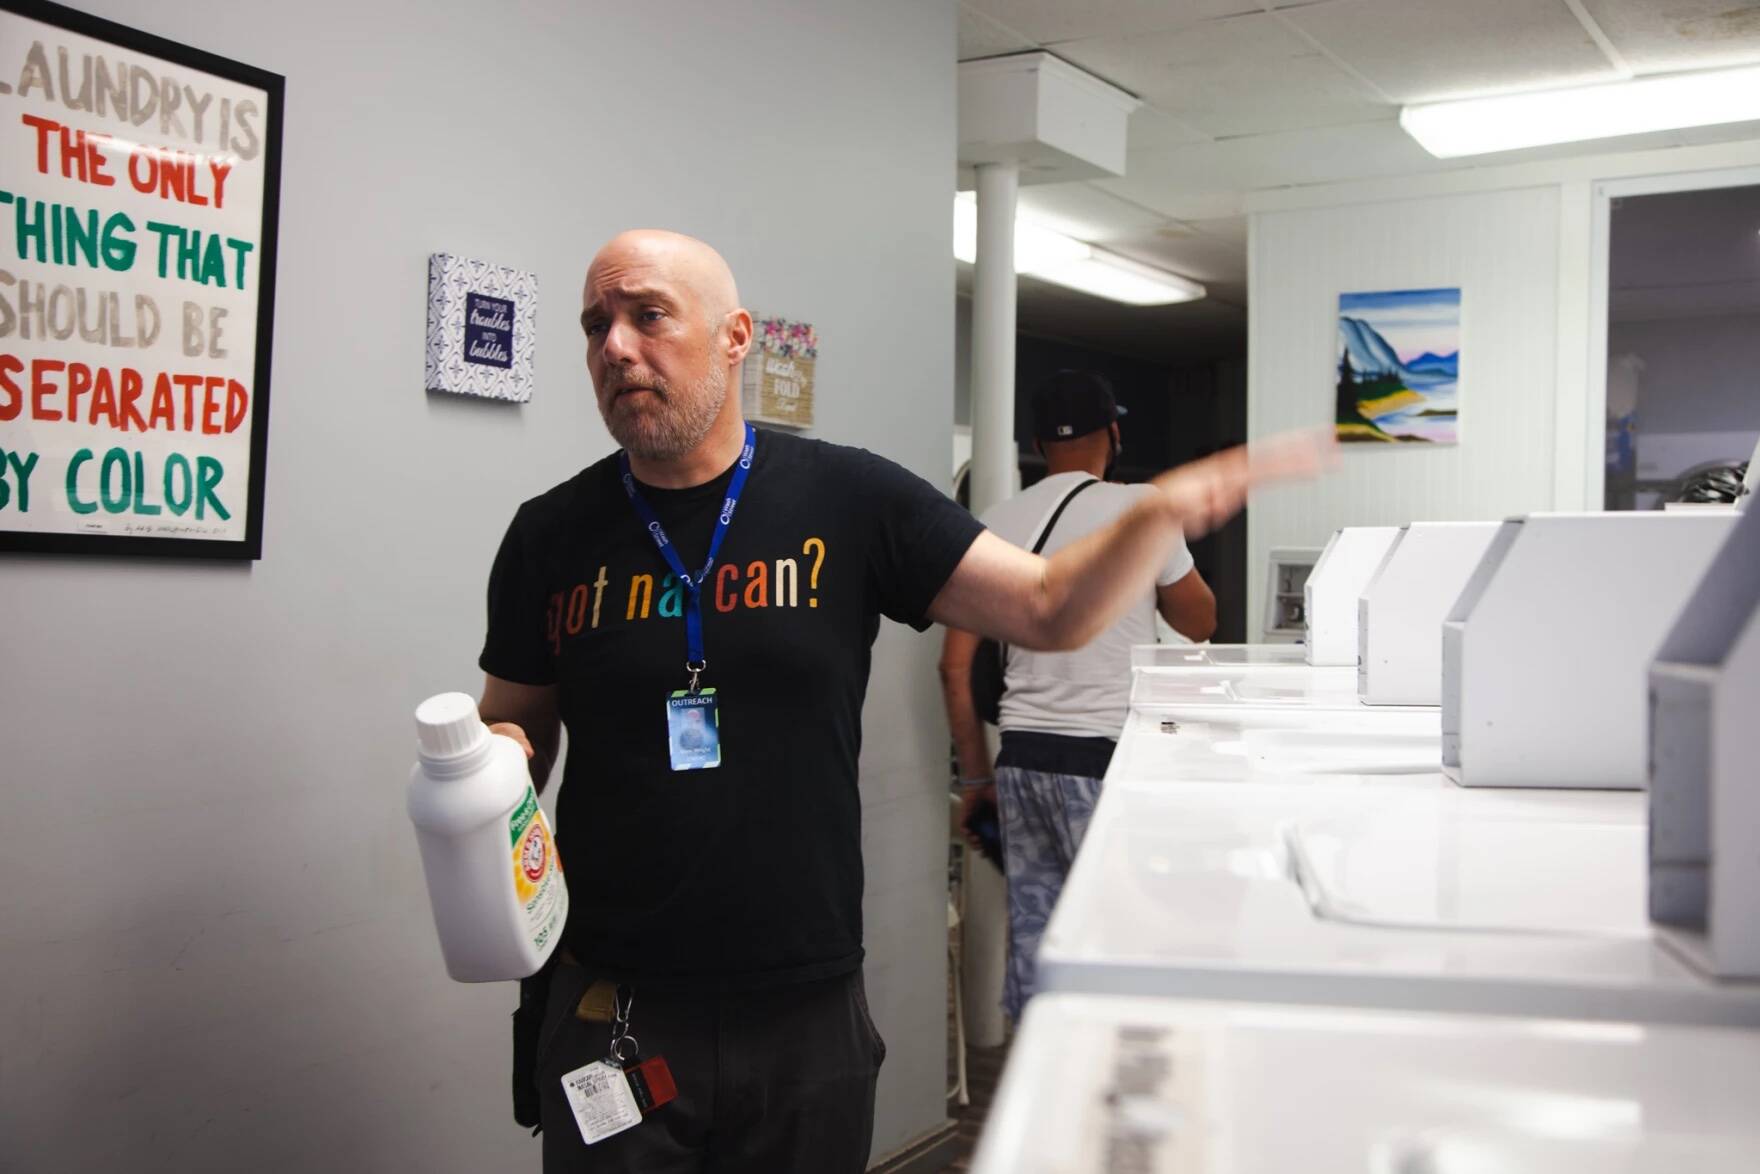 Dam Wright offers free Narcan at the Loads Of Love nights, although he hopes the broader community would not stigmatize unhoused people with substance use issues. When someone needs Narcan he puts it “discreetly in a paper bag, so they don’t feel shame.” (Gabriela Lozada/NHPR)